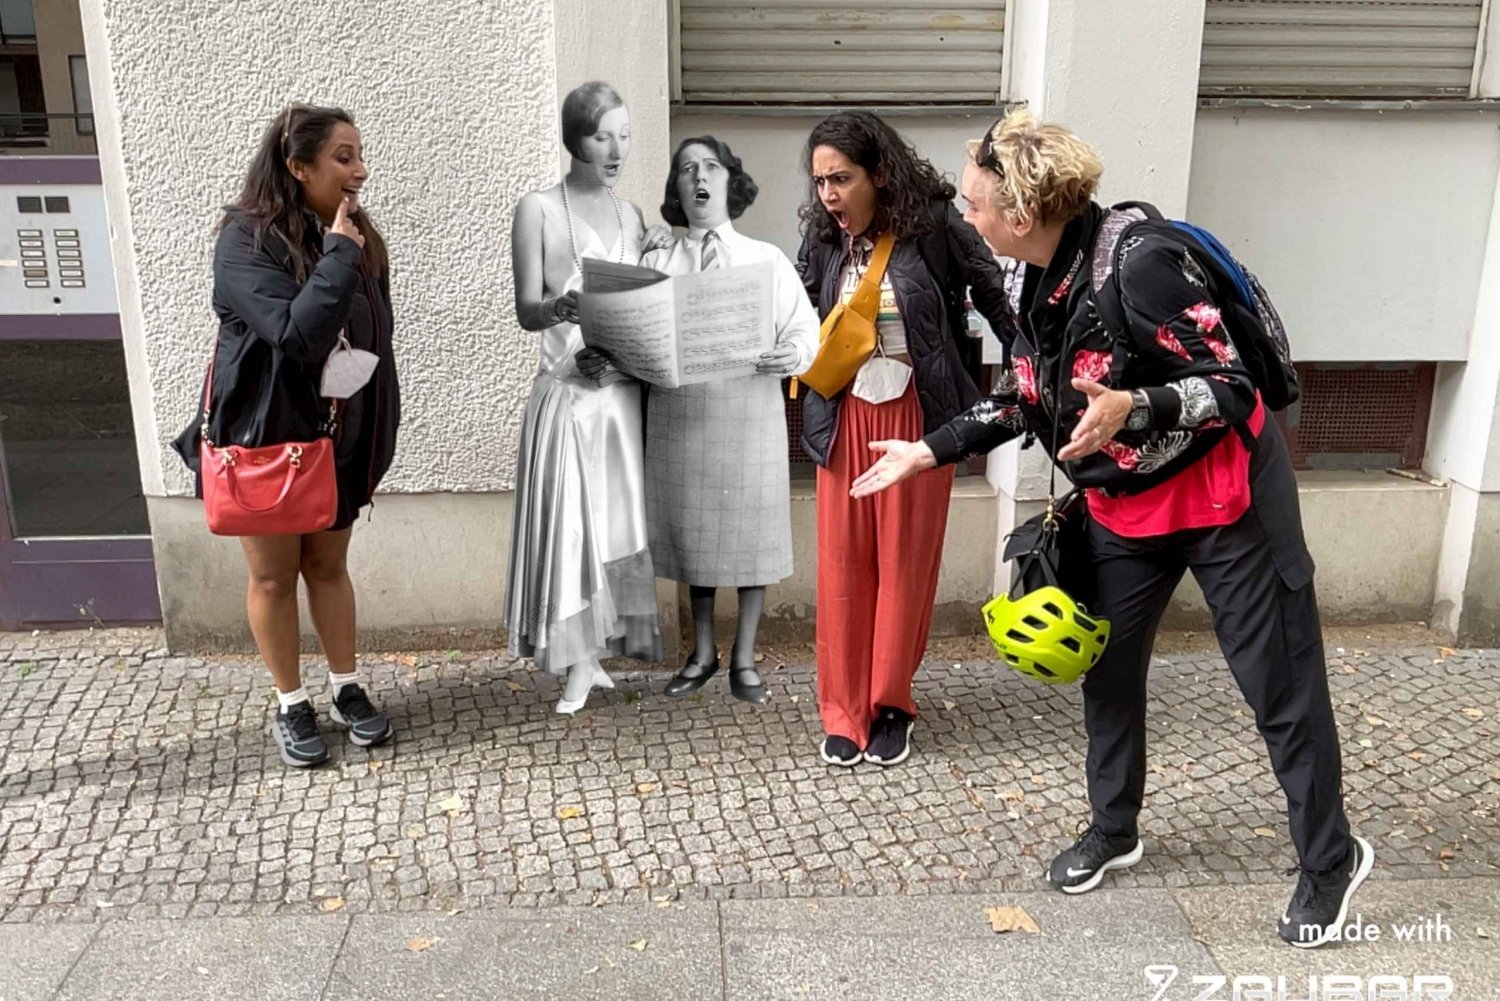 Berlins sexhistorie - guidet rundvisning med Augmented Reality